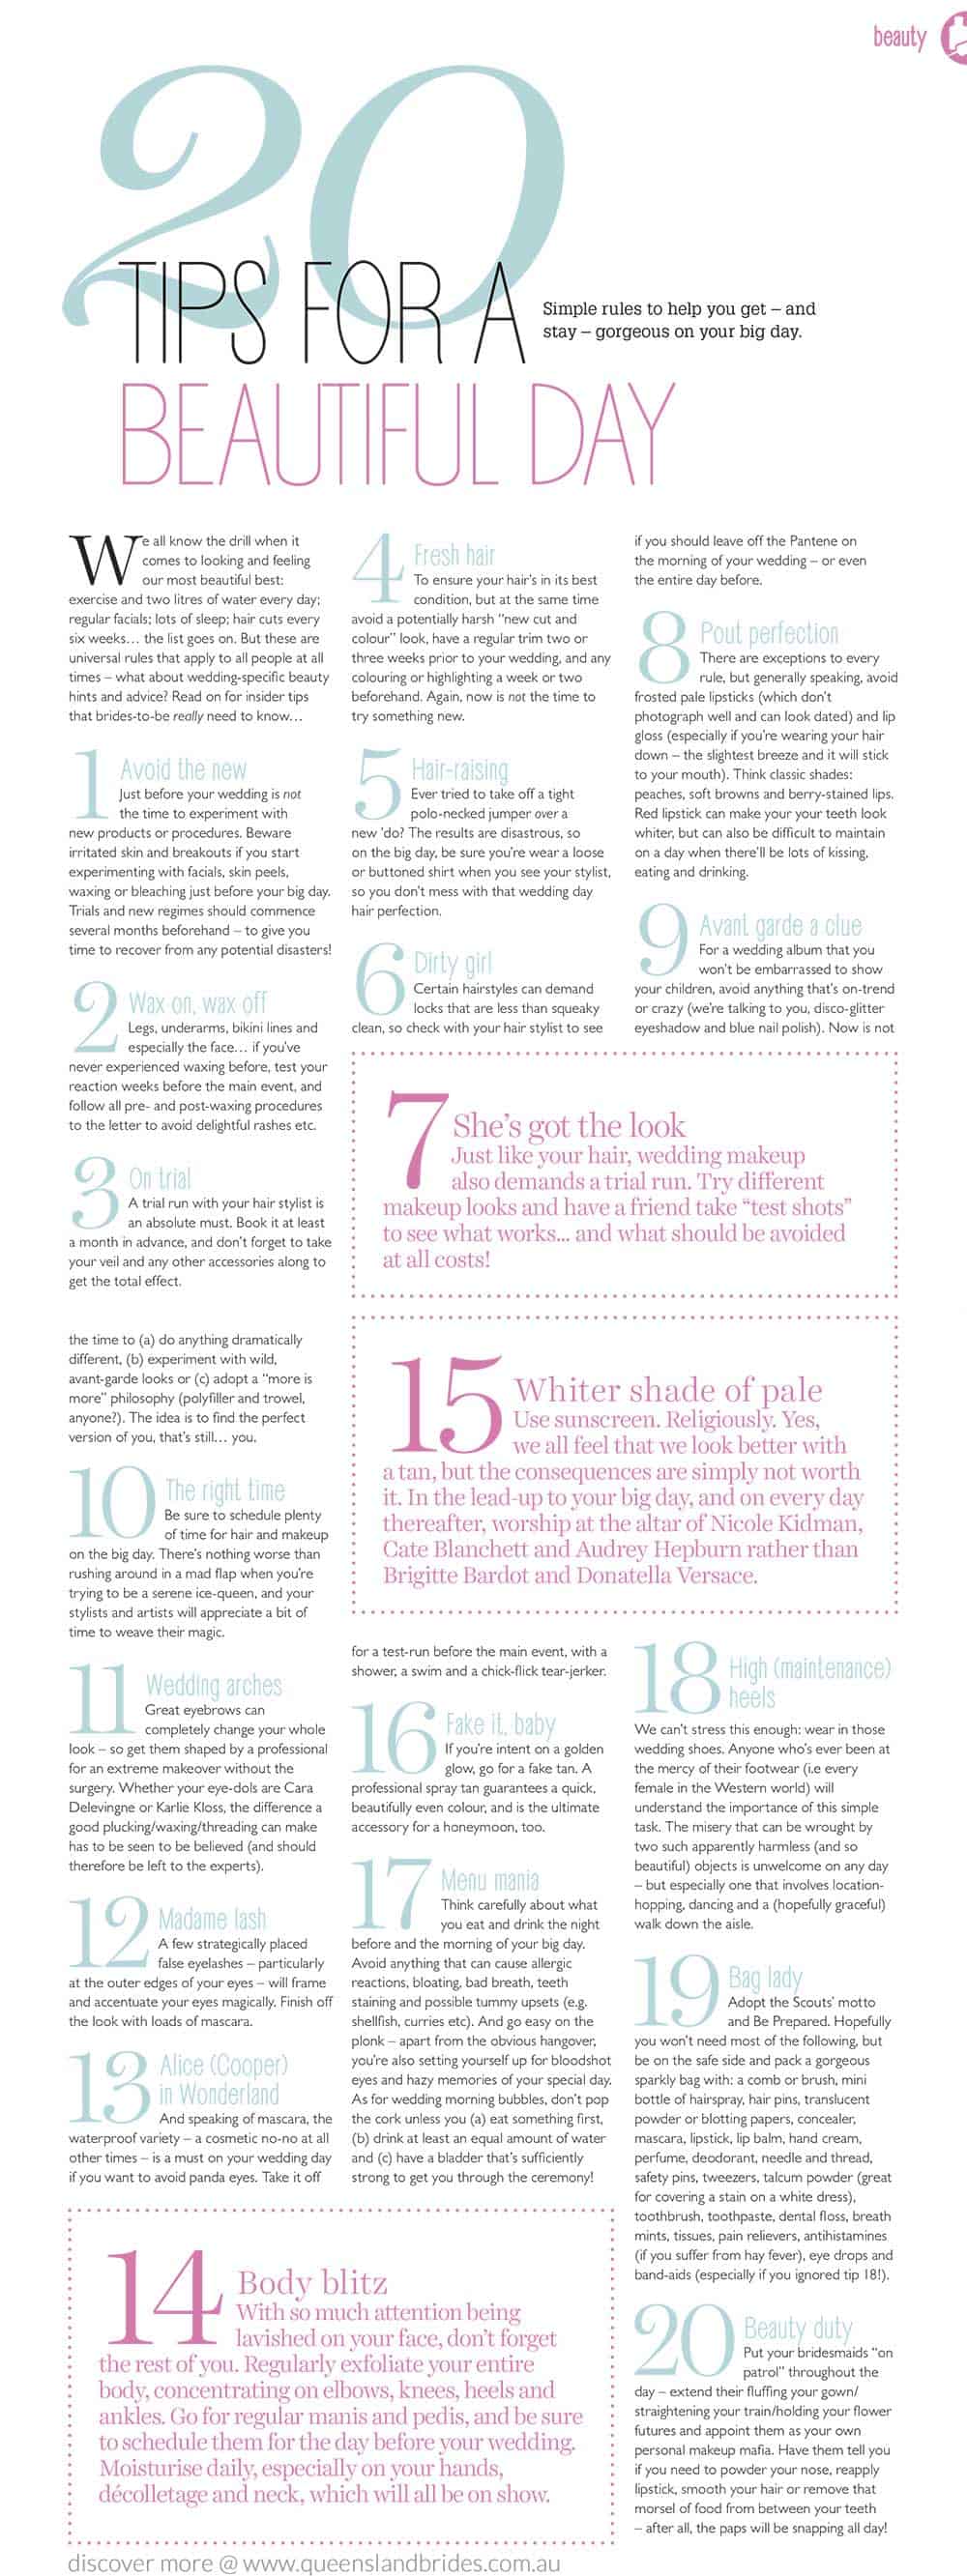 20 TIPS for a beauty-full wedding day. 